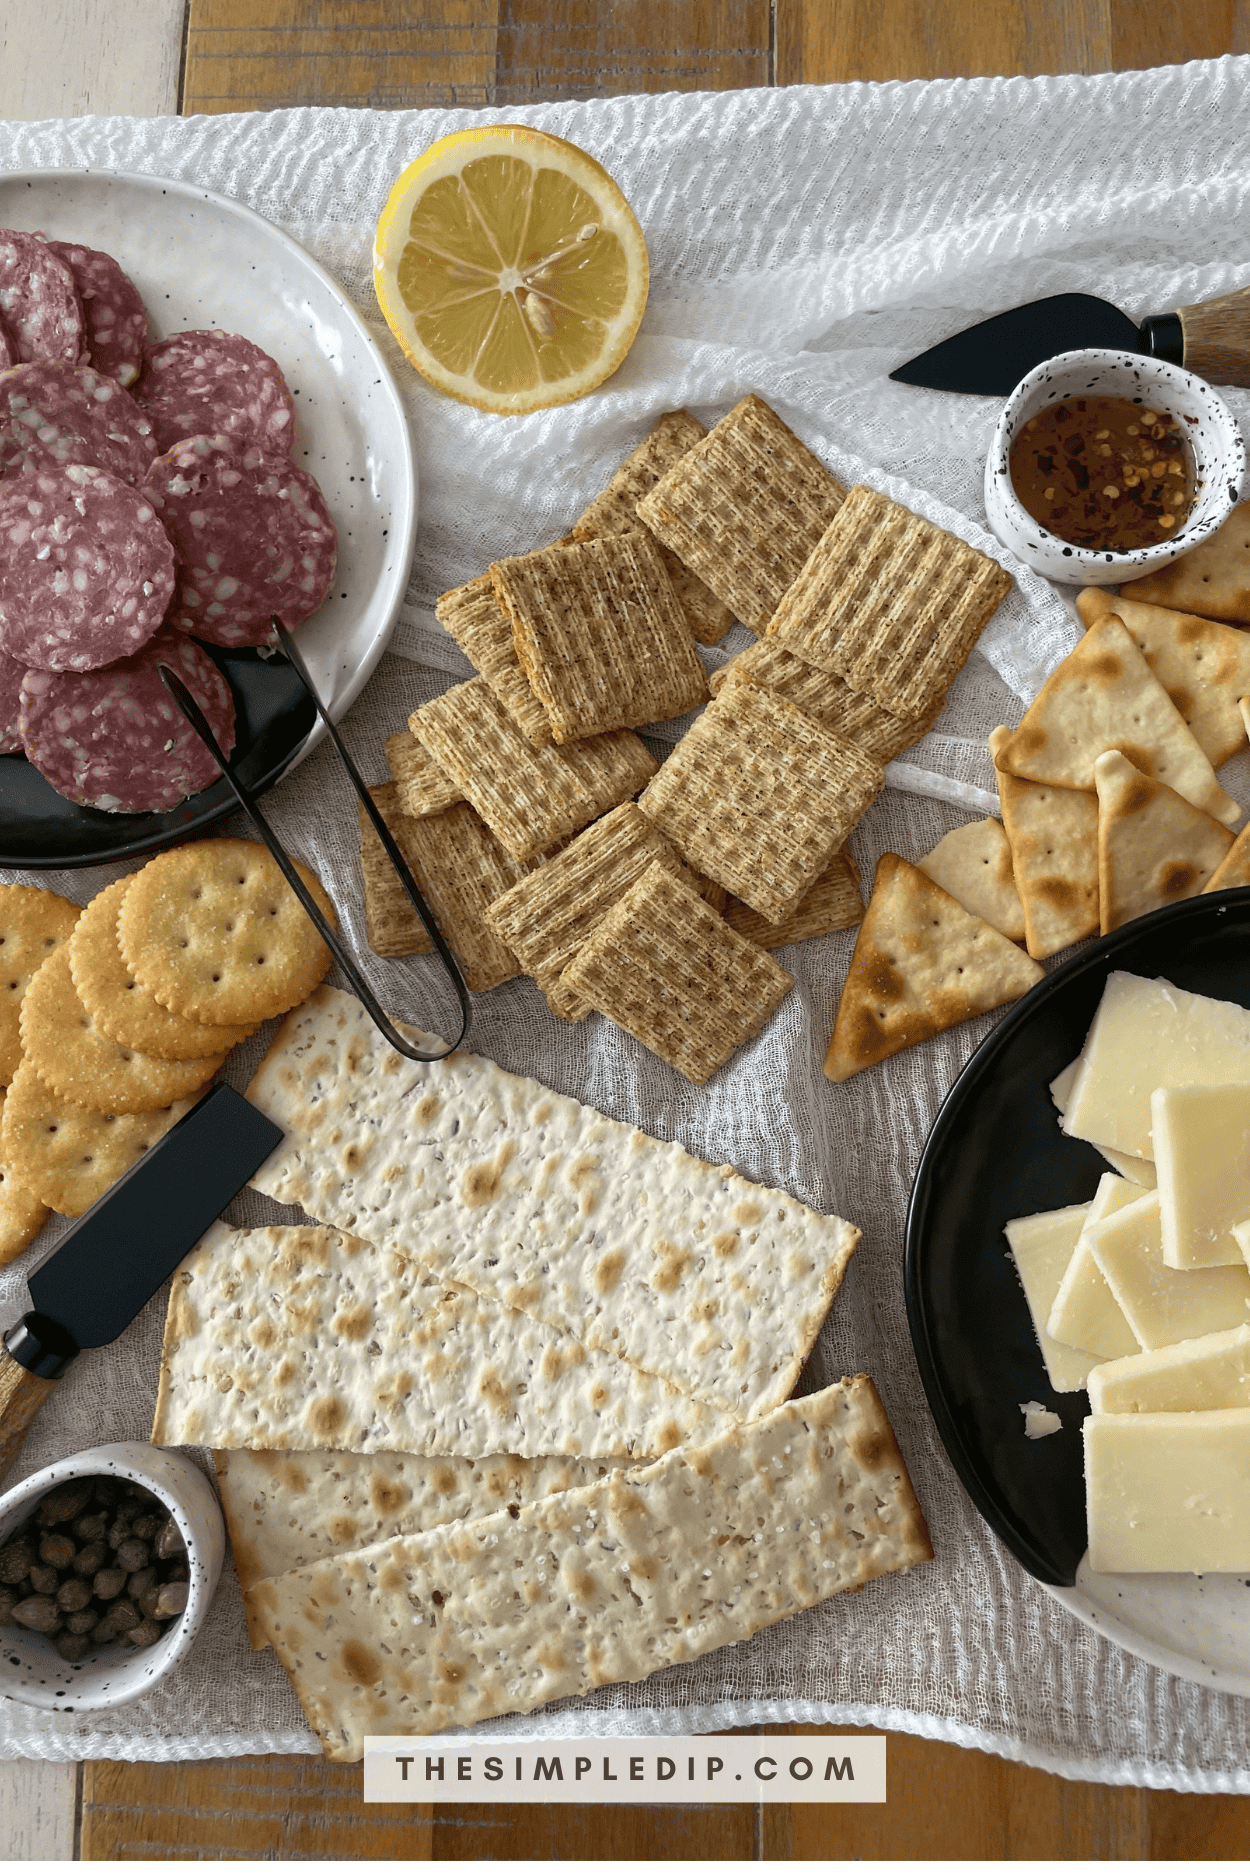 This is an image of a beautiful cracker and charcuterie spread, featuring 4 different kinds of crackers, sliced cheese, sliced soppressata, hot honey, capers, and a sliced half lemon.